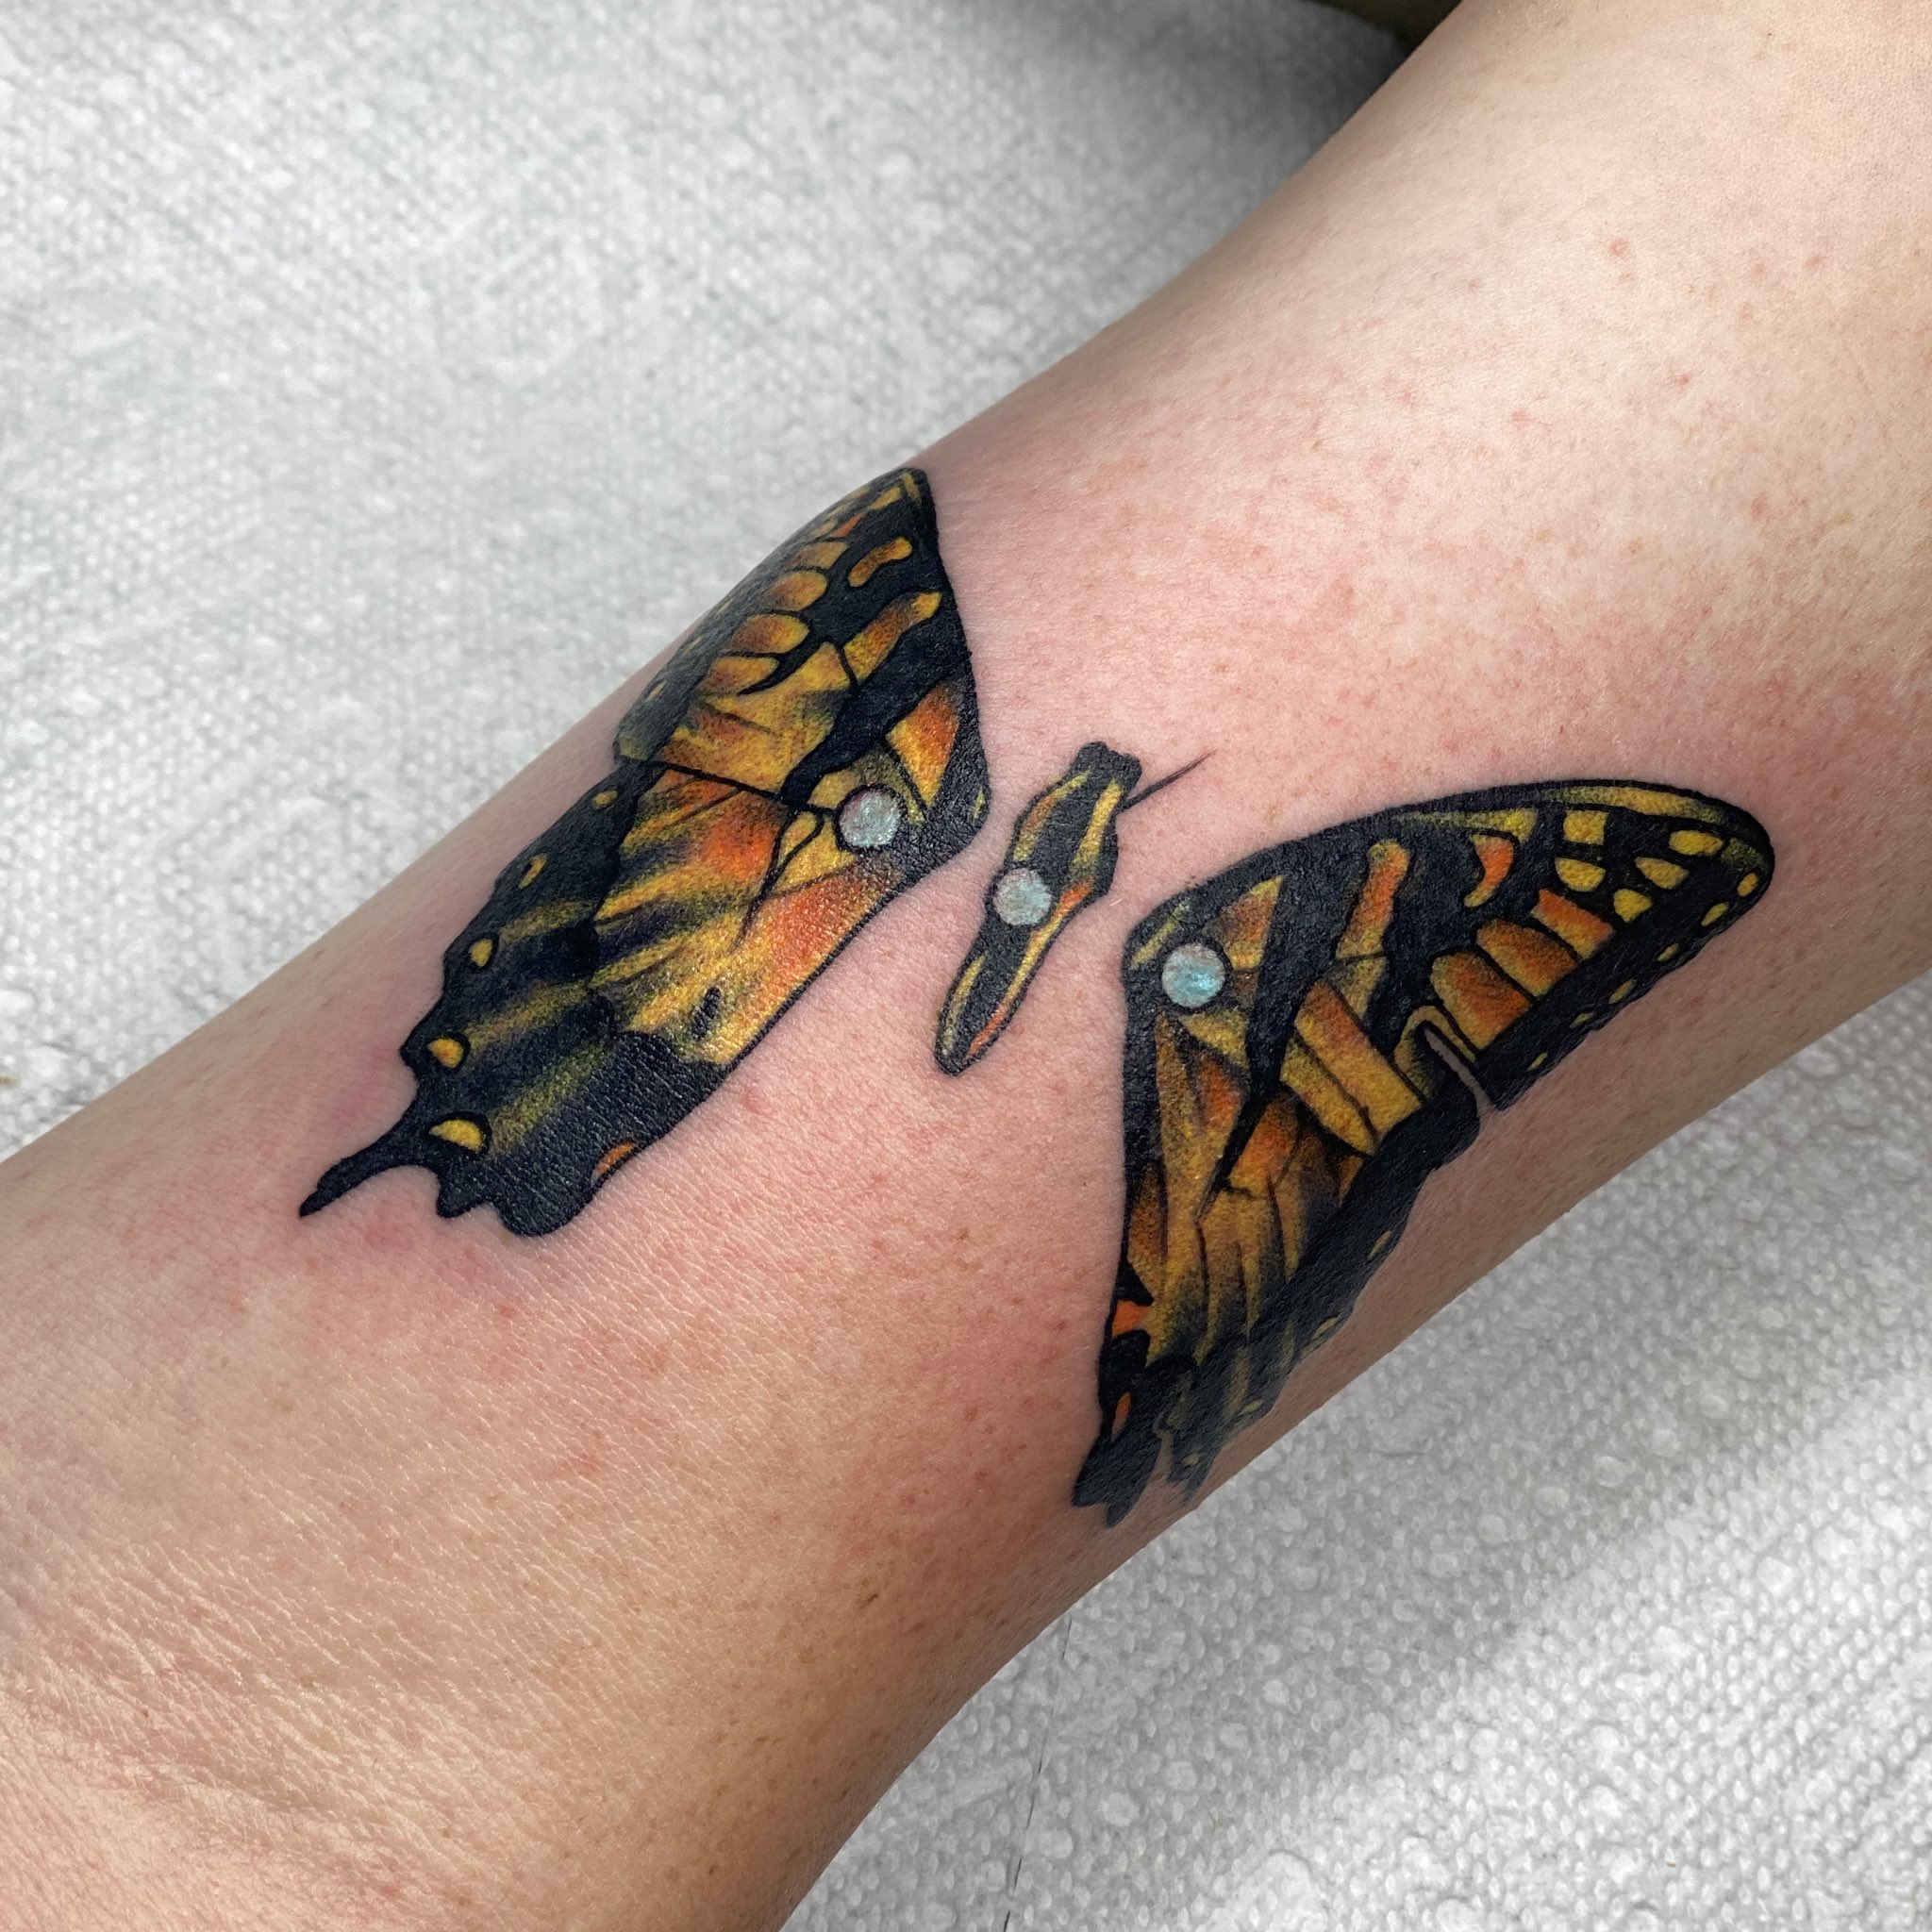 Foxey ☽ on X: Got to tattoo Paramore's brand new eyes album